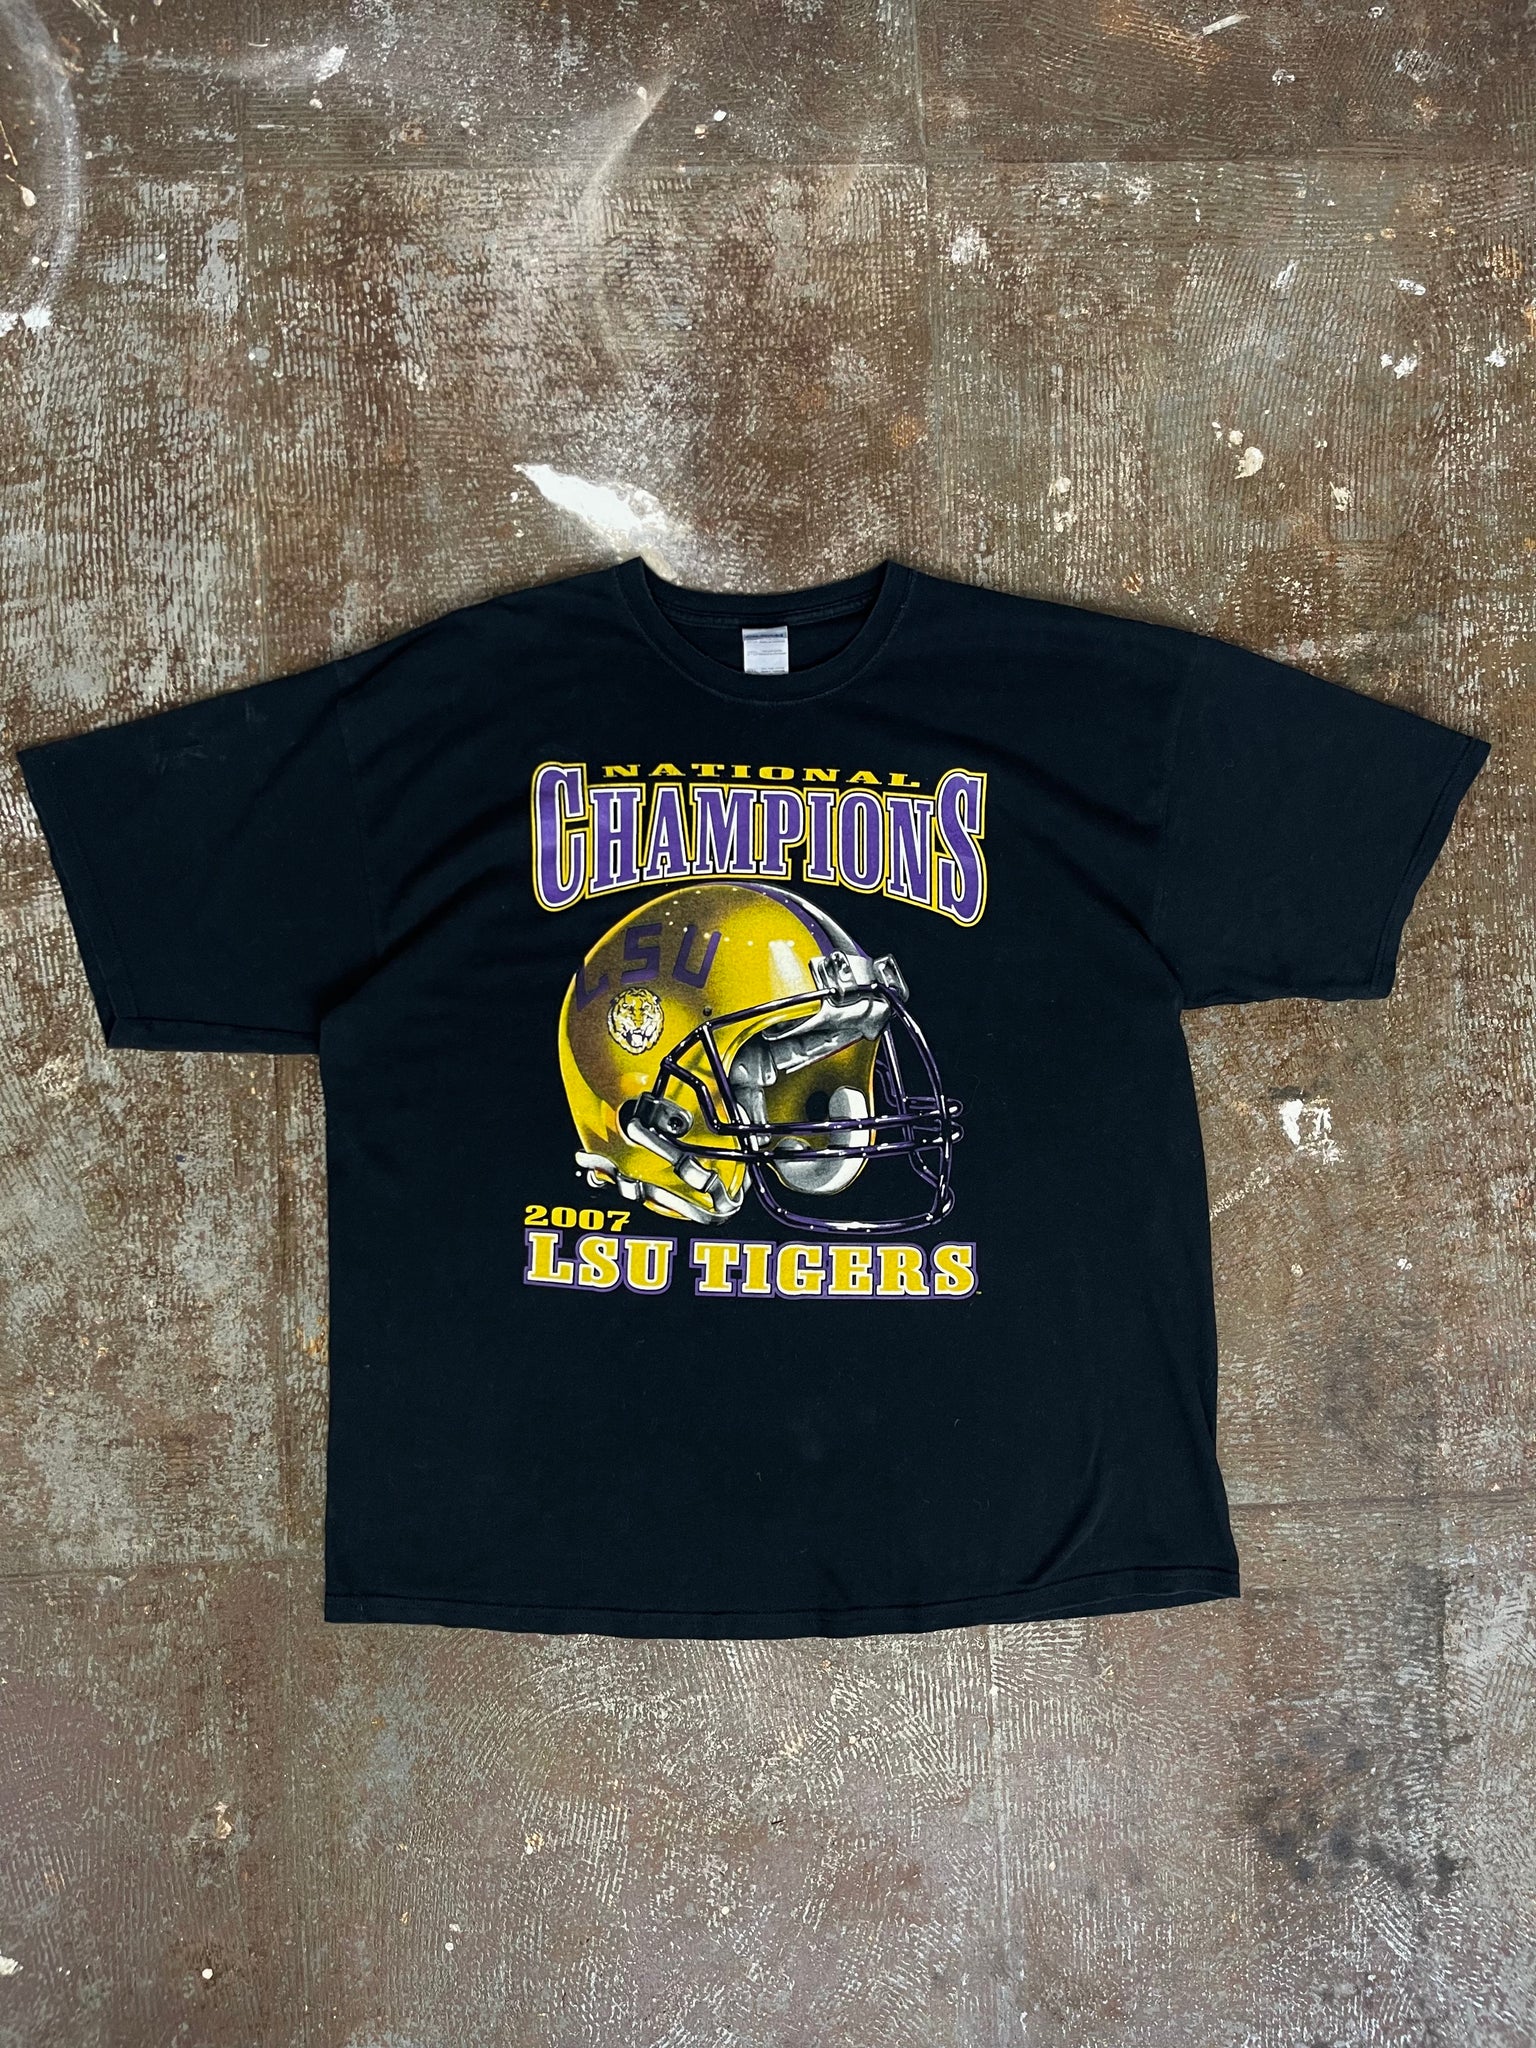 LSU TIGERS NATIONAL CHAMIONS 2007 T-SHIRT